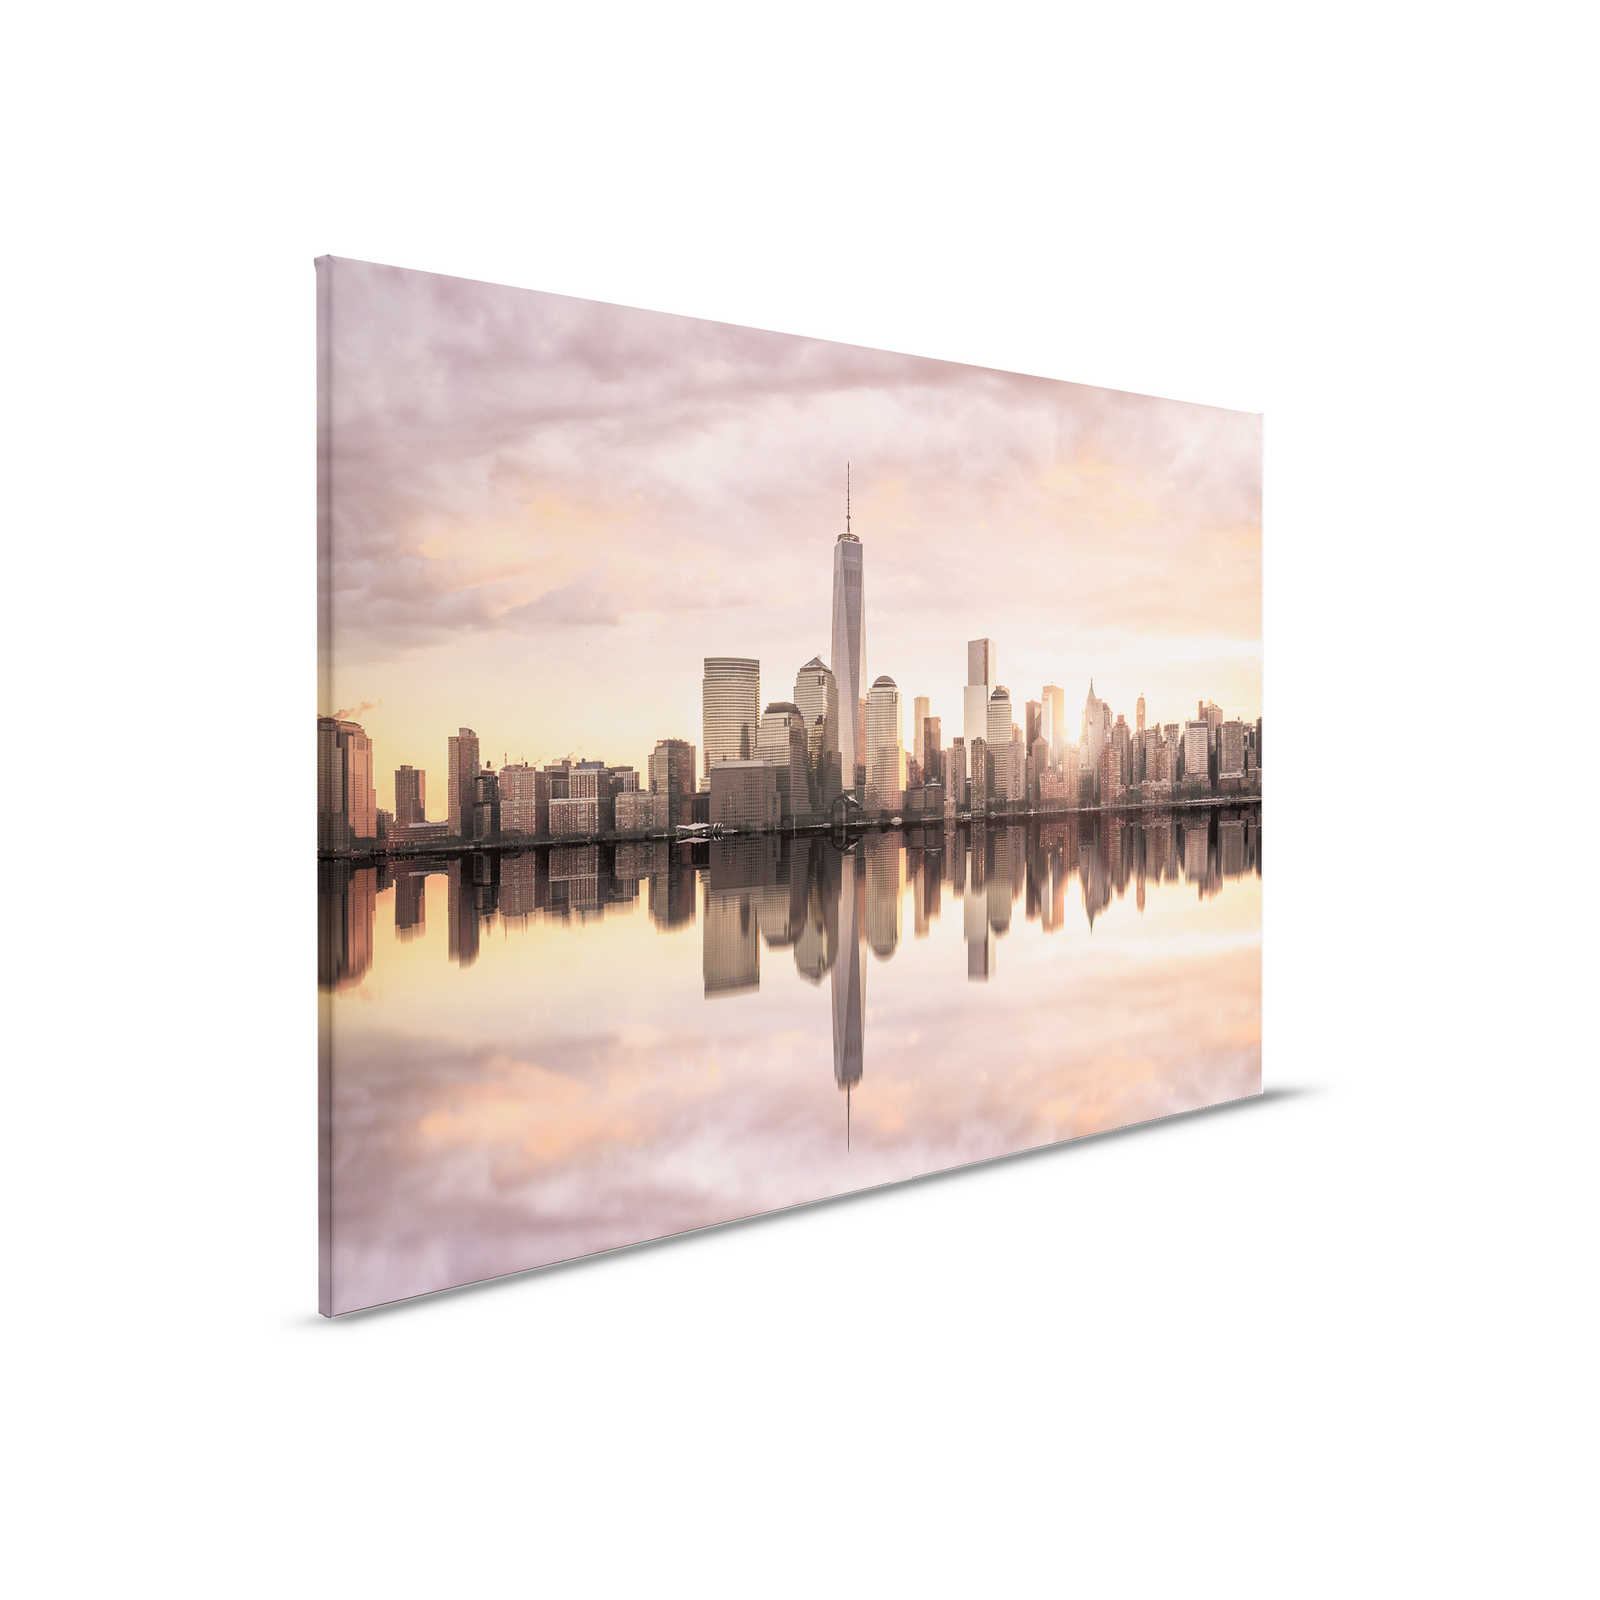         Canvas New York Skyline in the Evening - 0.90 m x 0.60 m
    